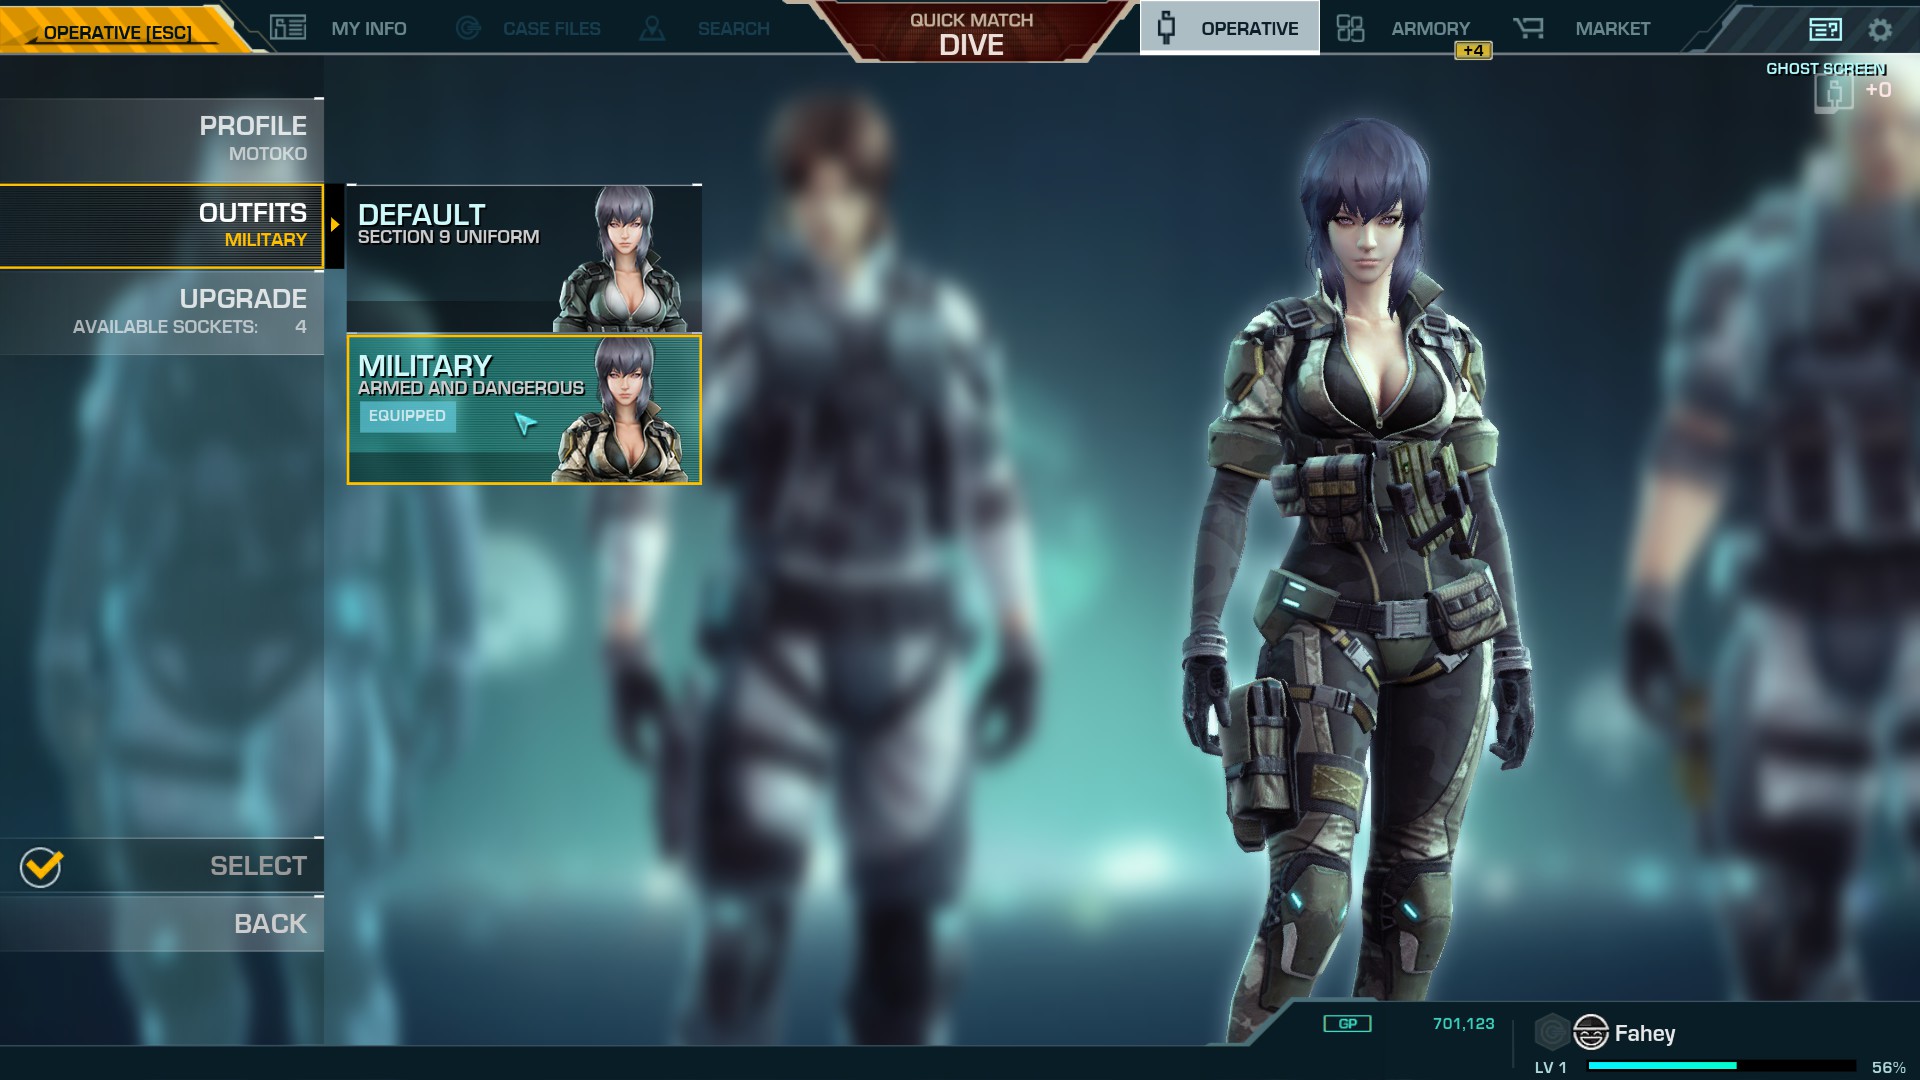 The Best Part Of The Ghost In The Shell Shooter So Far Is The Tutorial